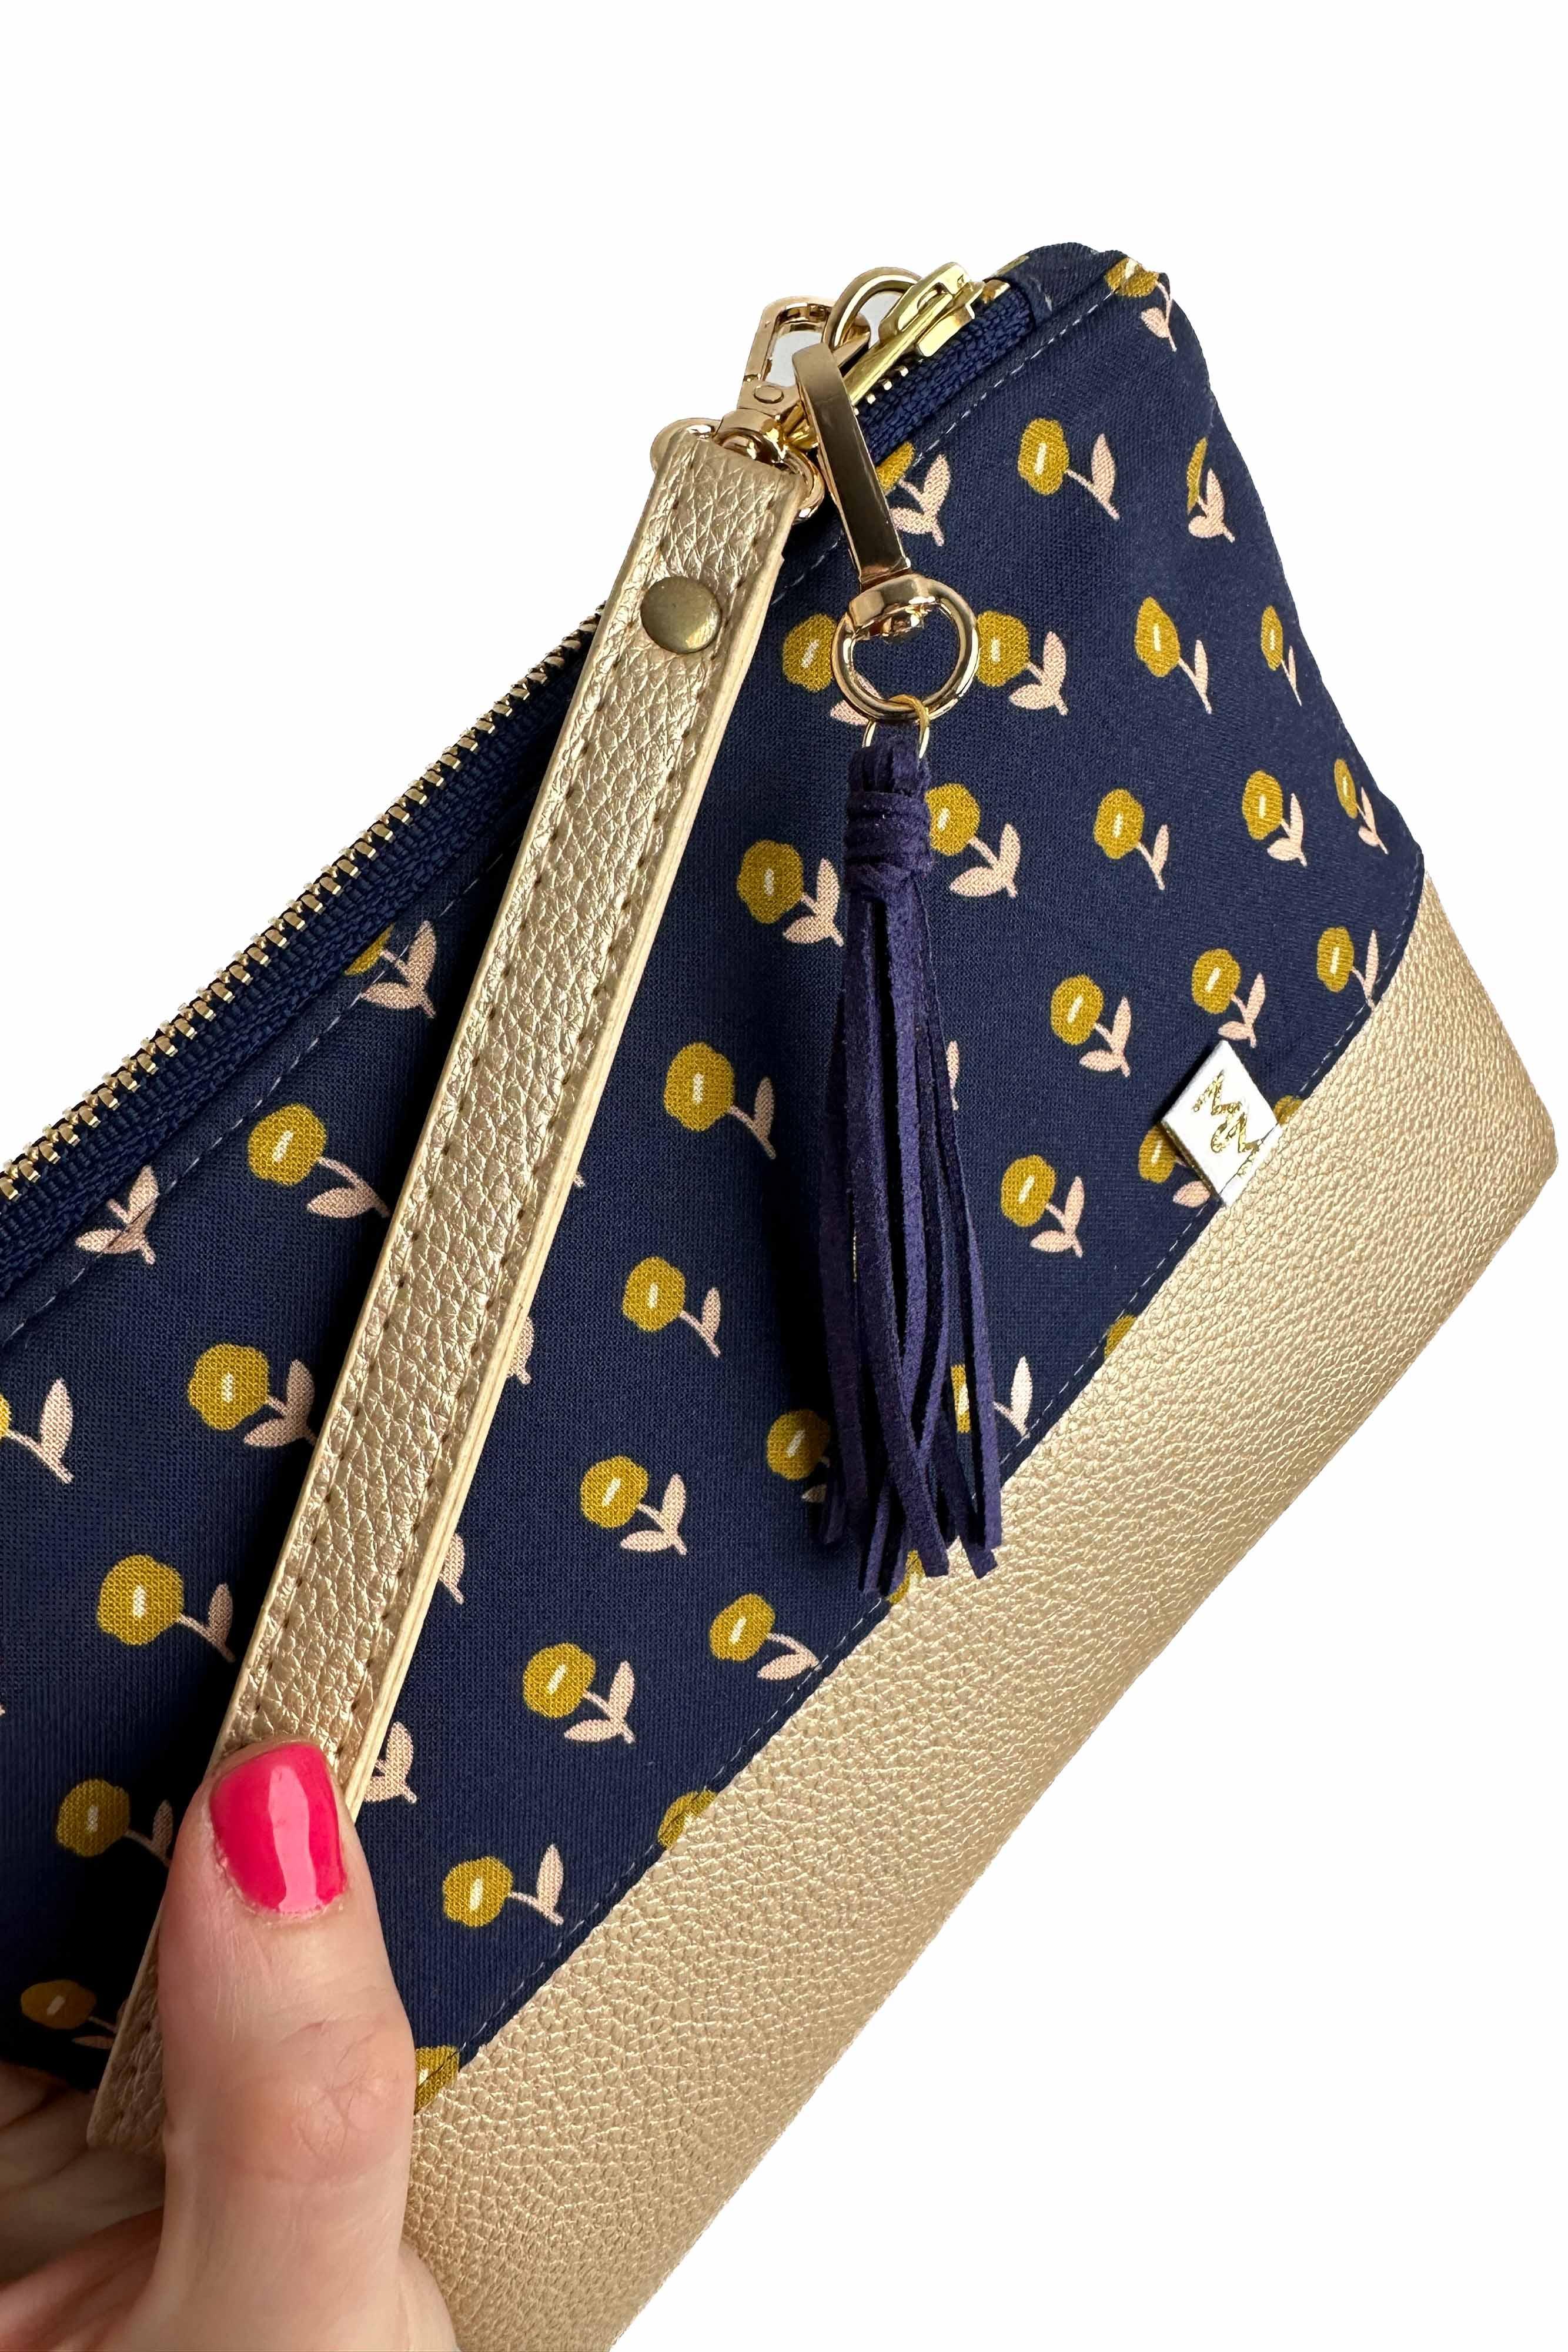 Simply Golden Convertible Crossbody Wristlet+ with Compartments READY TO SHIP - Modern Makerie